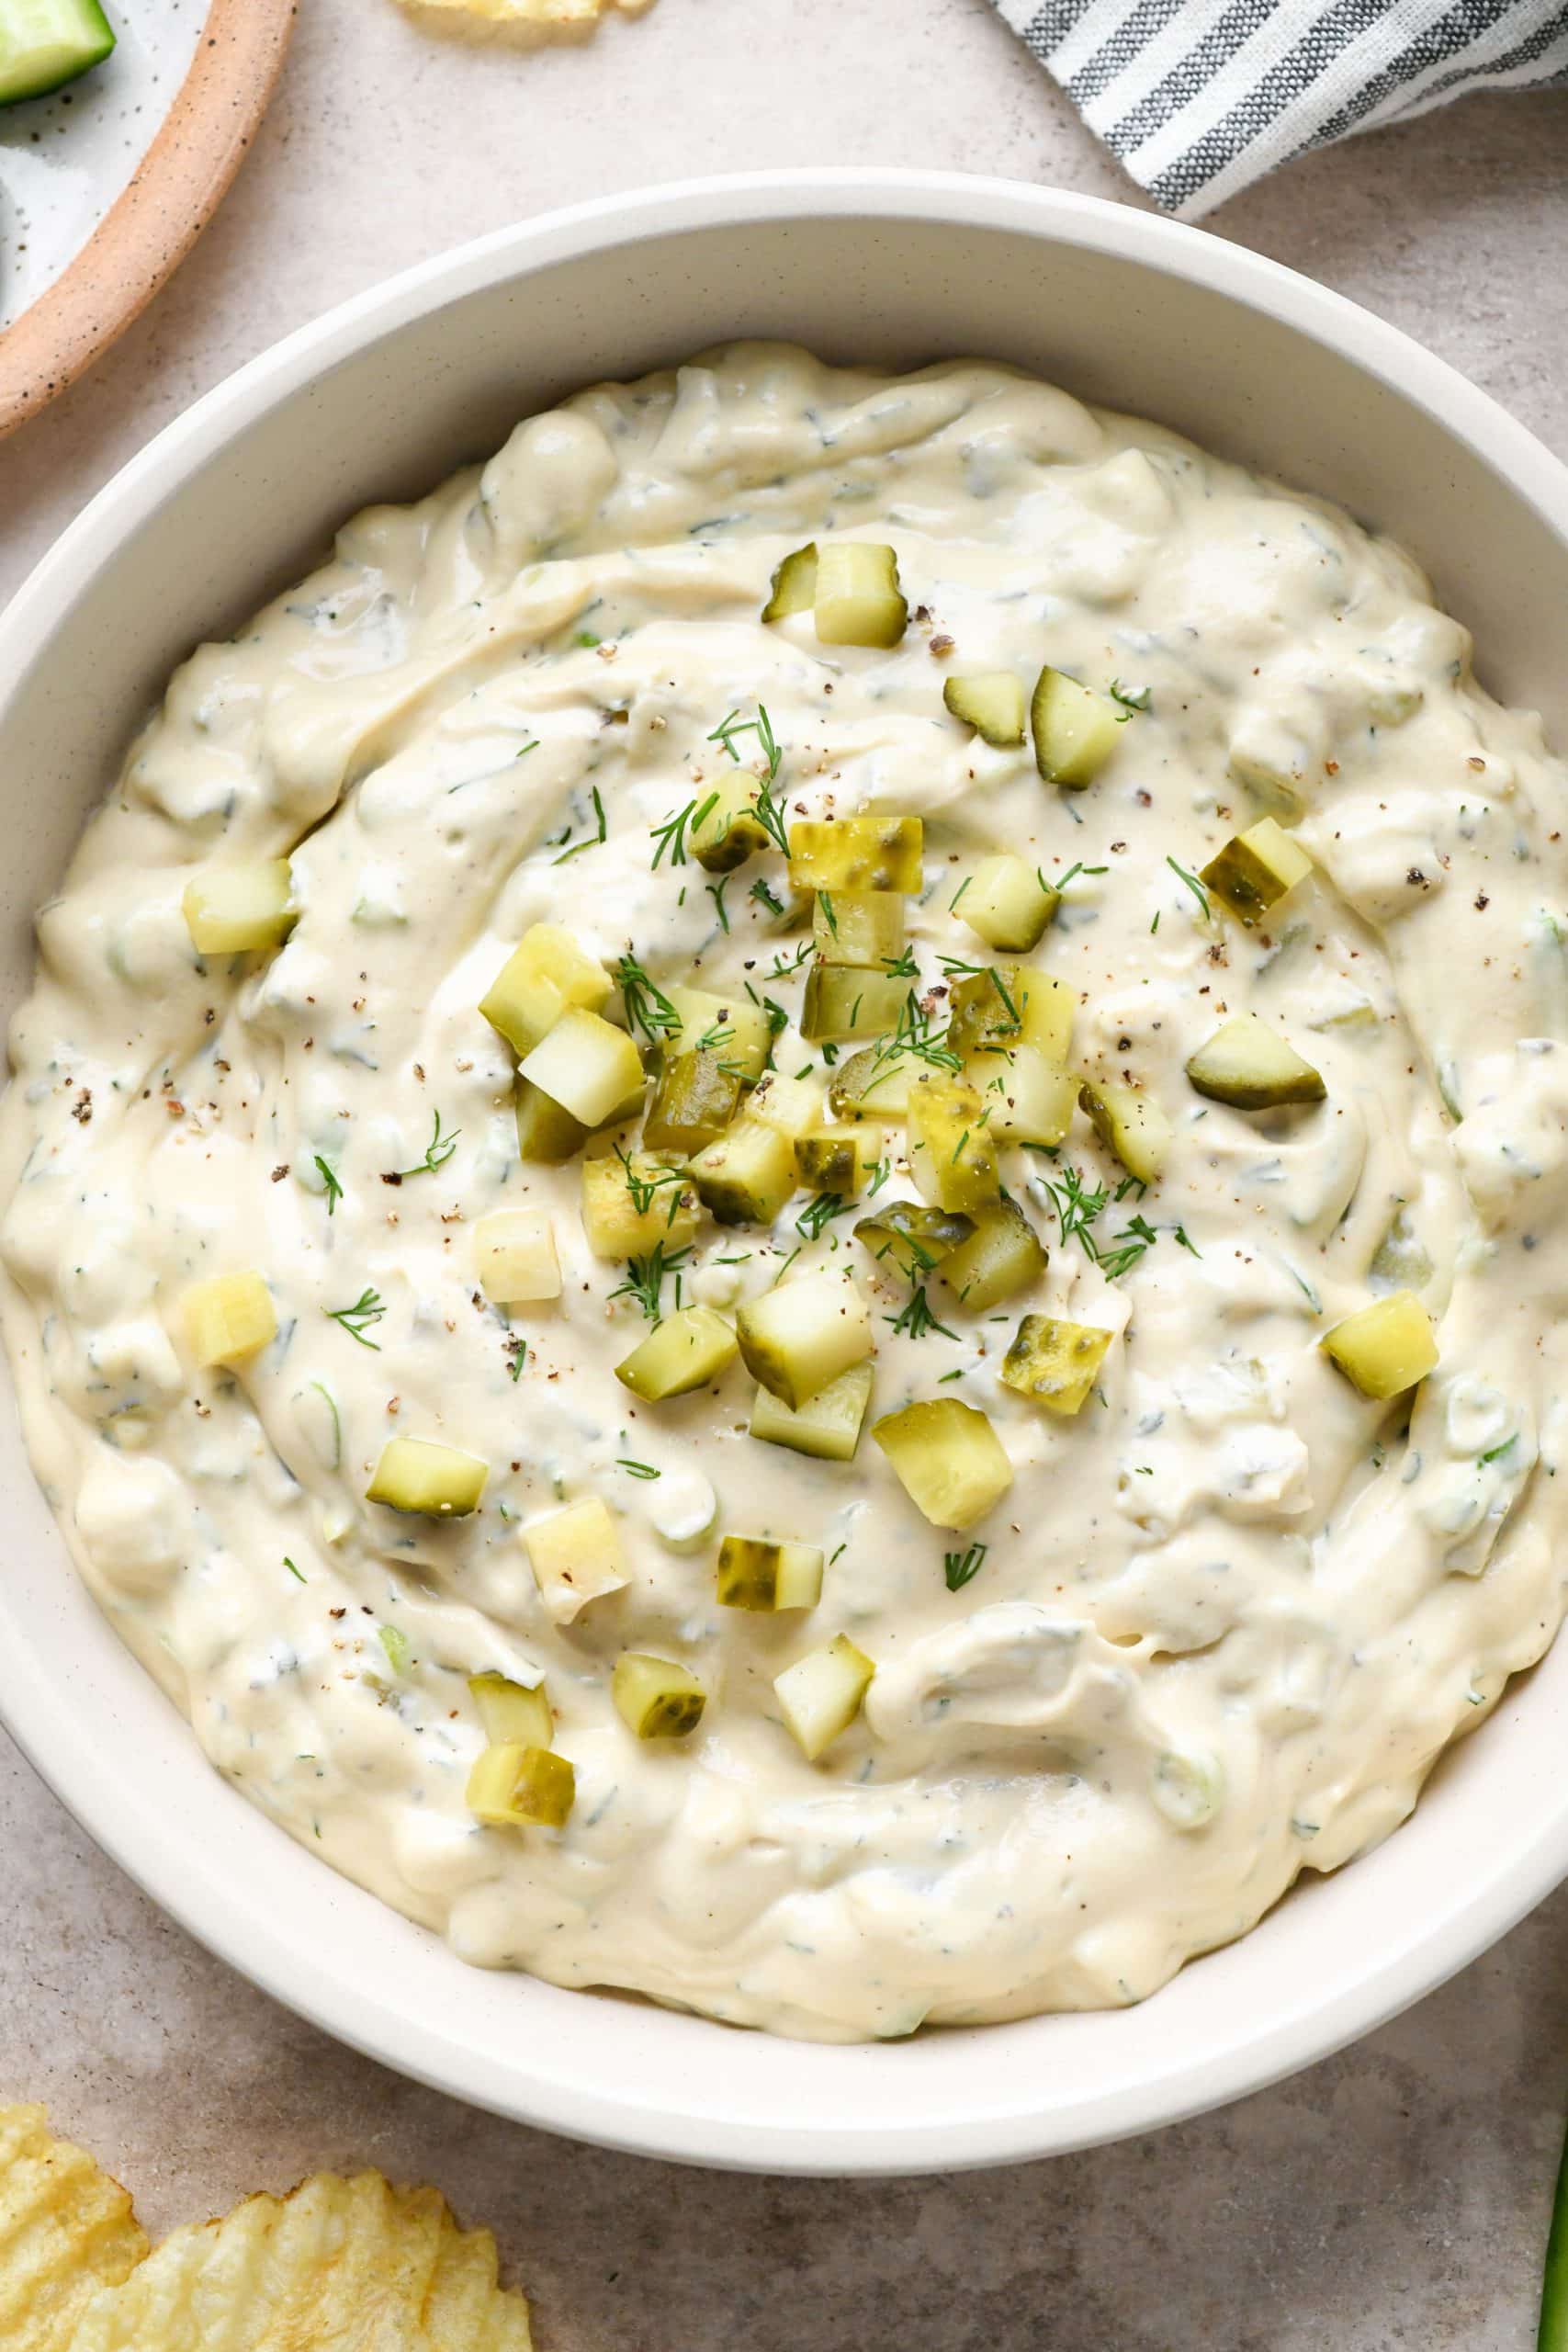 https://nyssaskitchen.com/wp-content/uploads/2022/07/Dill-Pickle-Dip-13-scaled.jpg